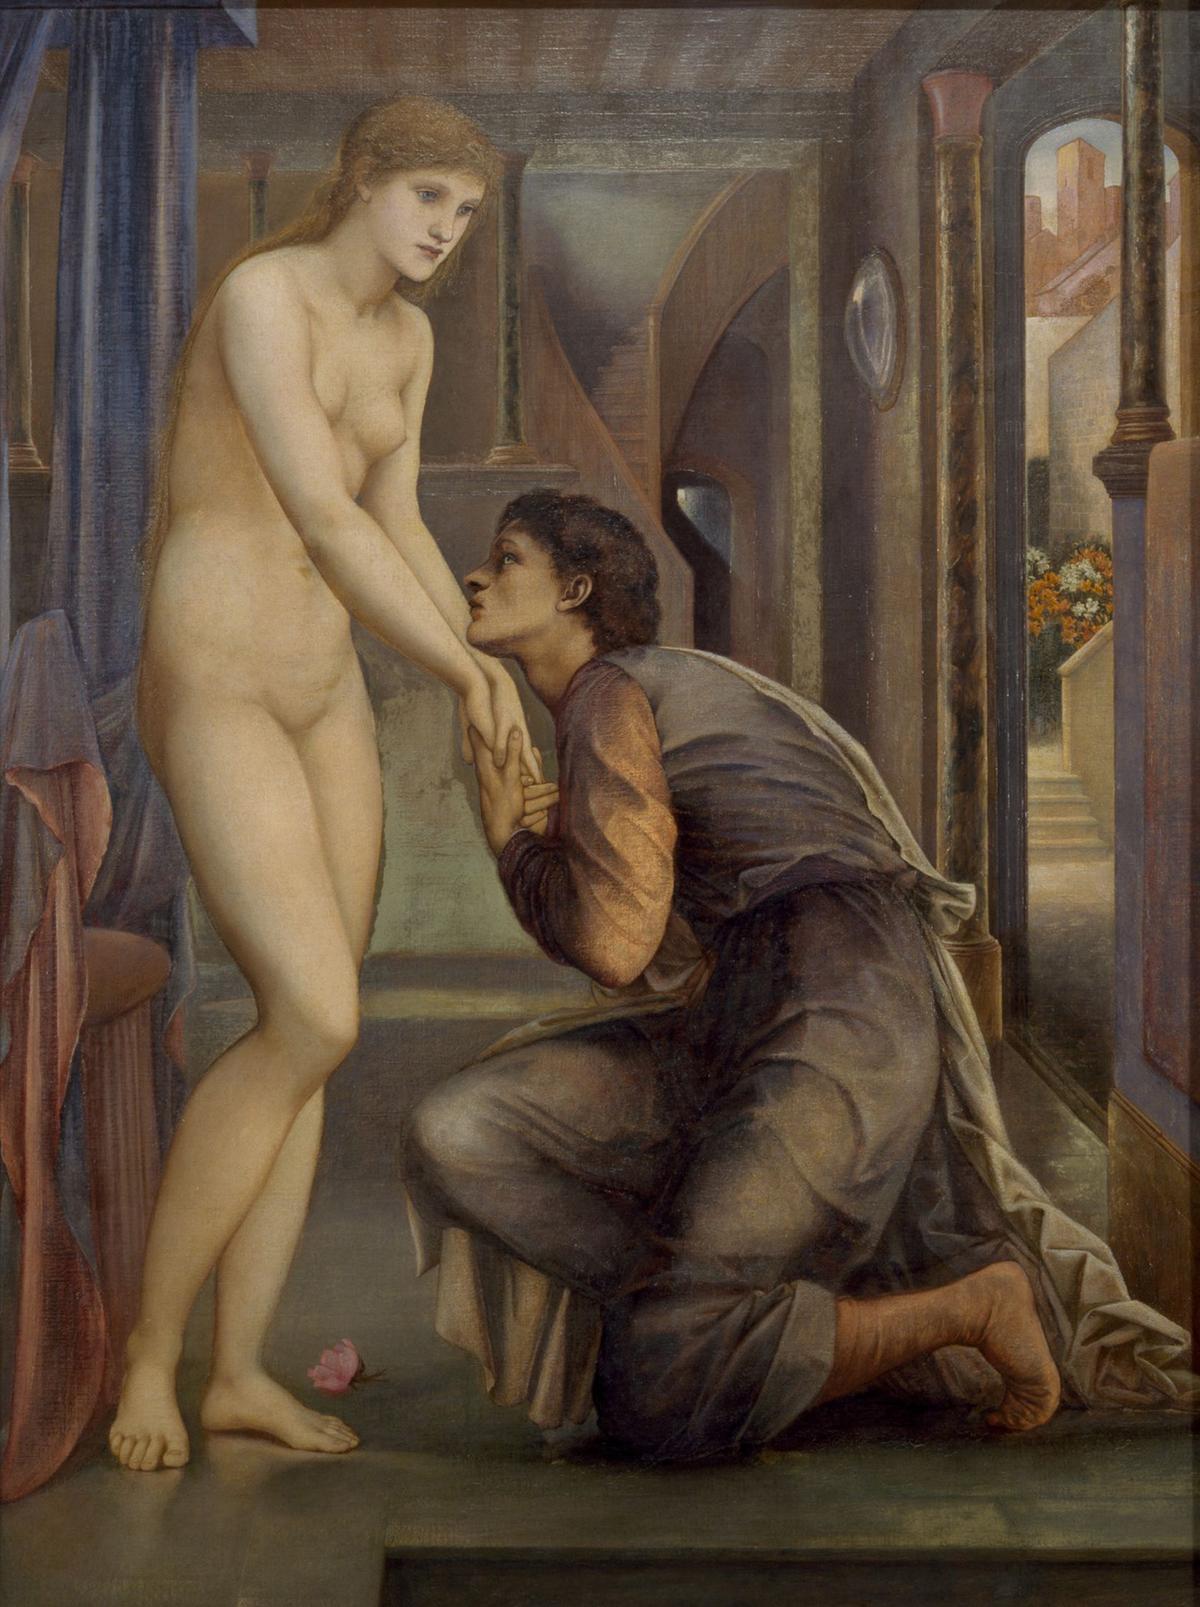 Pygmalion’s love for Galatea represents our appreciation and love for divine things. "Pygmalion and the Image – The Soul Attains," 1878, by Sir Edward Burne-Jones. Birmingham Museums Trust. (Public Domain)